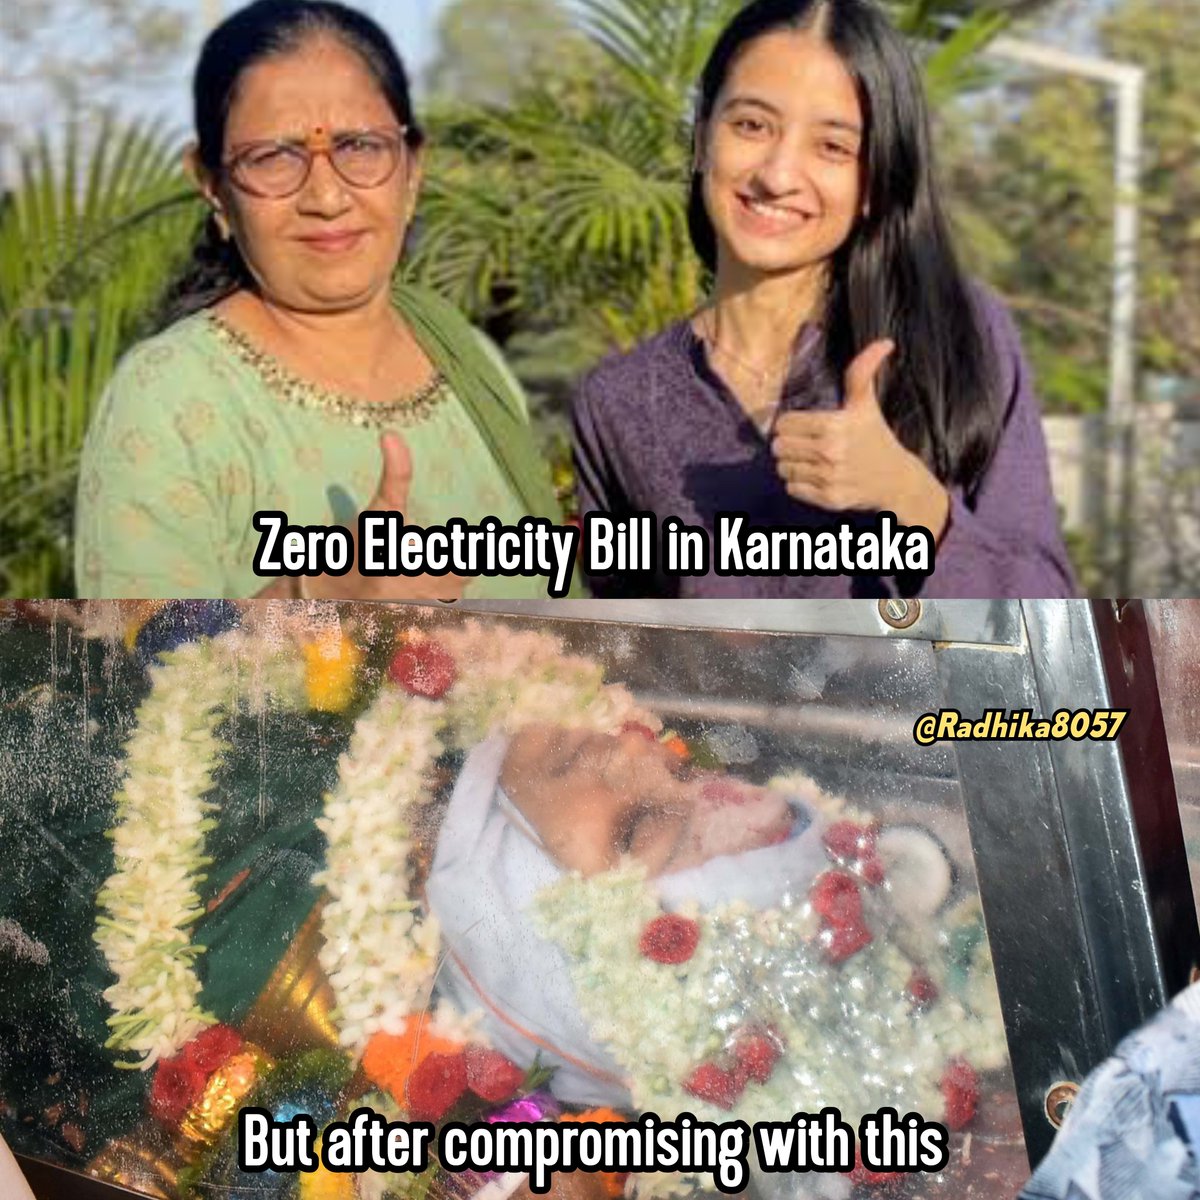 How can freebies ruin a state? Karnataka is a good example of this. 😏

#JusticeForNeha